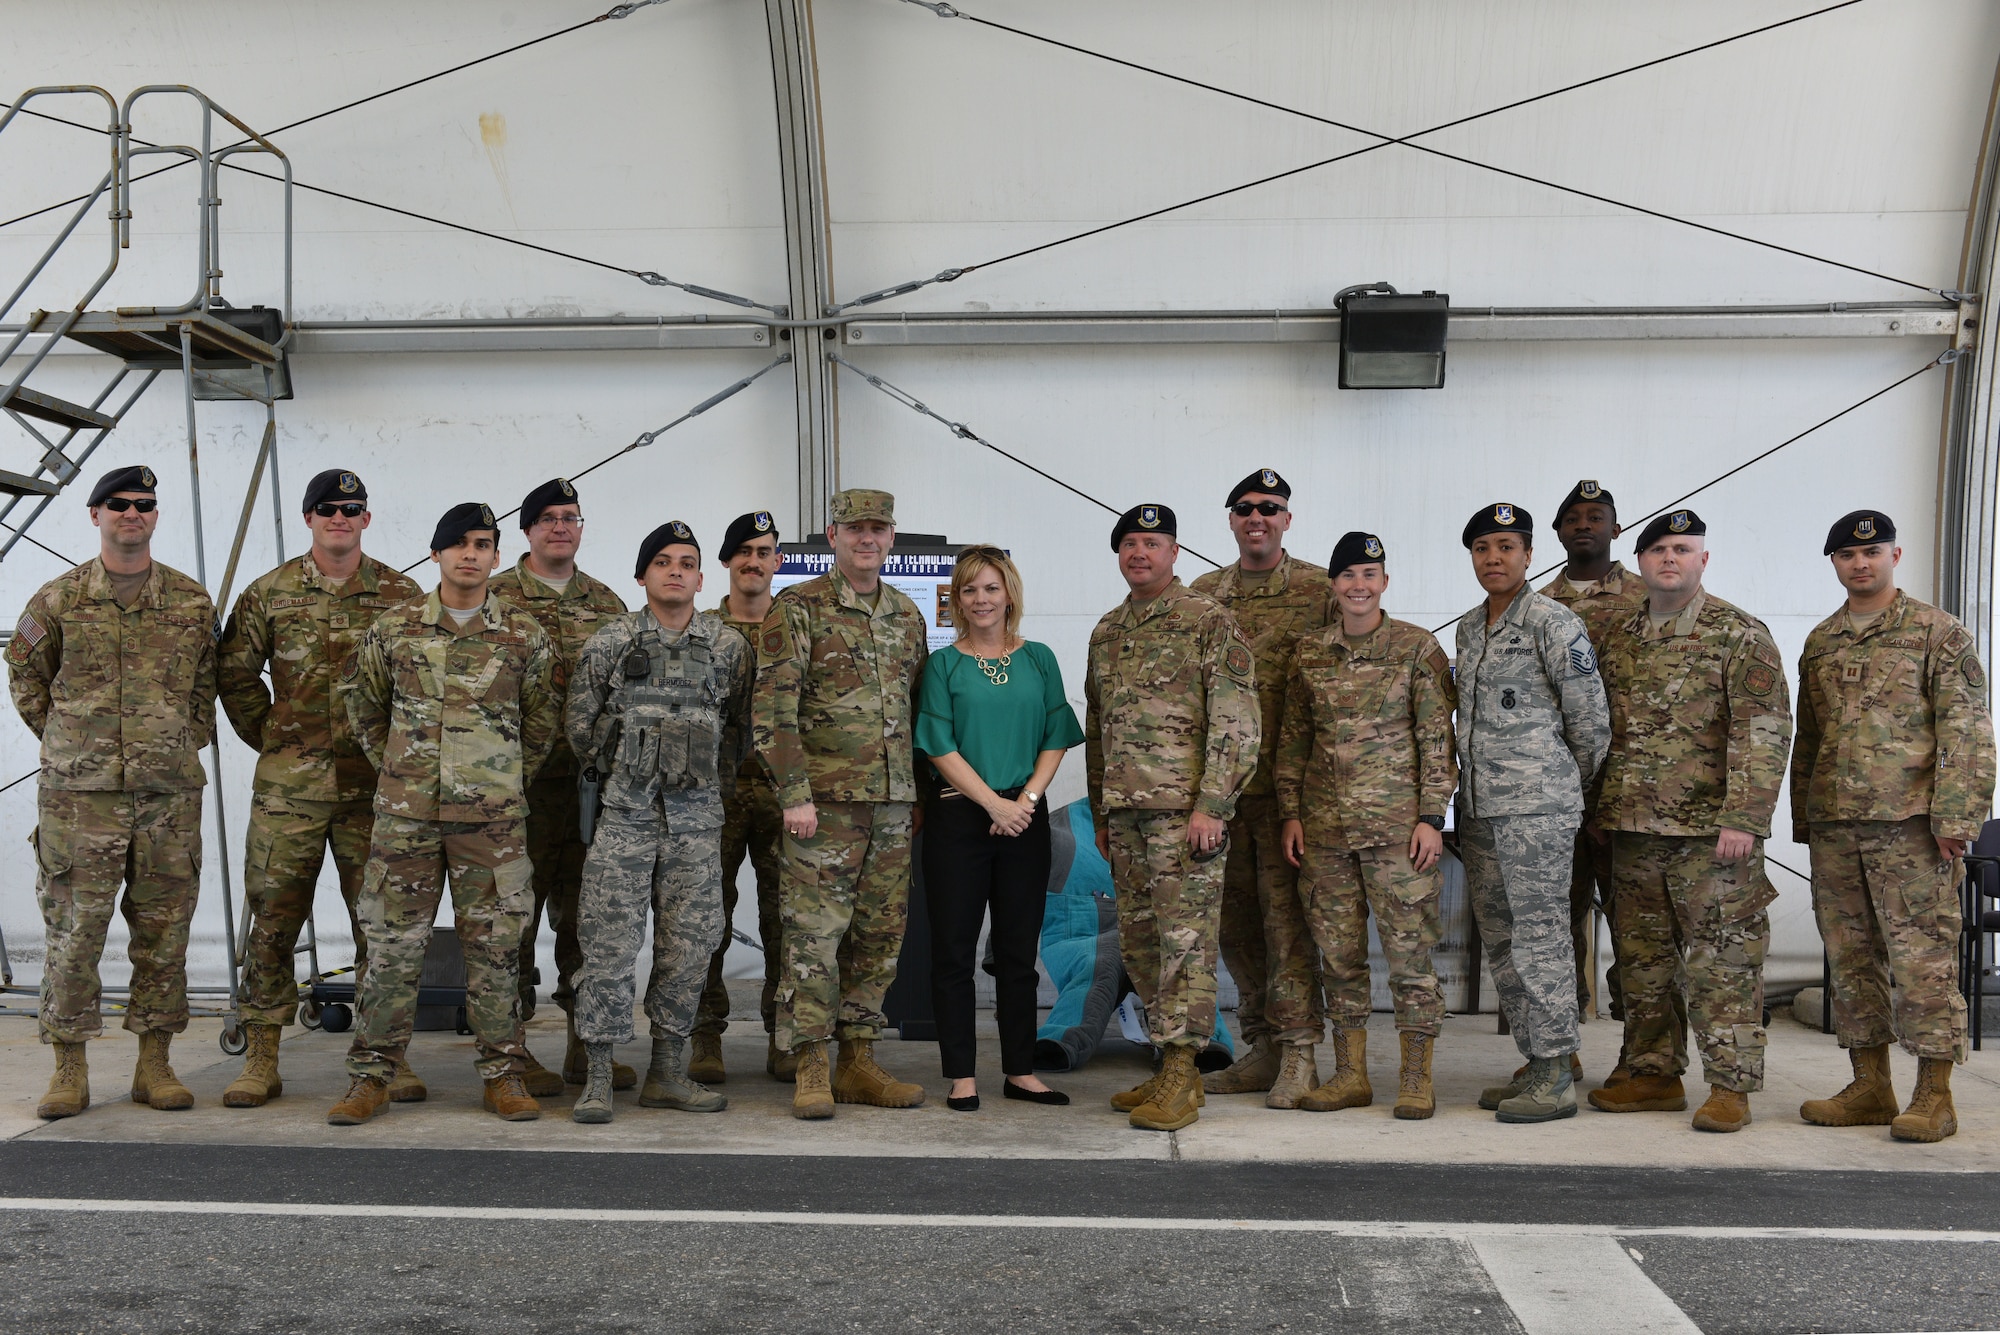 Brig Gen Doug Schiess, 45th Space Wing commander, his wife, Debbie, and 45th Security Forces Squadron Airmen pose for a photo at Patrick Air Force Base, Fla., April 16, 2019. Schiess visited the 45th SFS to learn about new capabilities and to be immersed in the Security Forces mission. (U.S. Air Force photo by Airman 1st Class Dalton Williams)